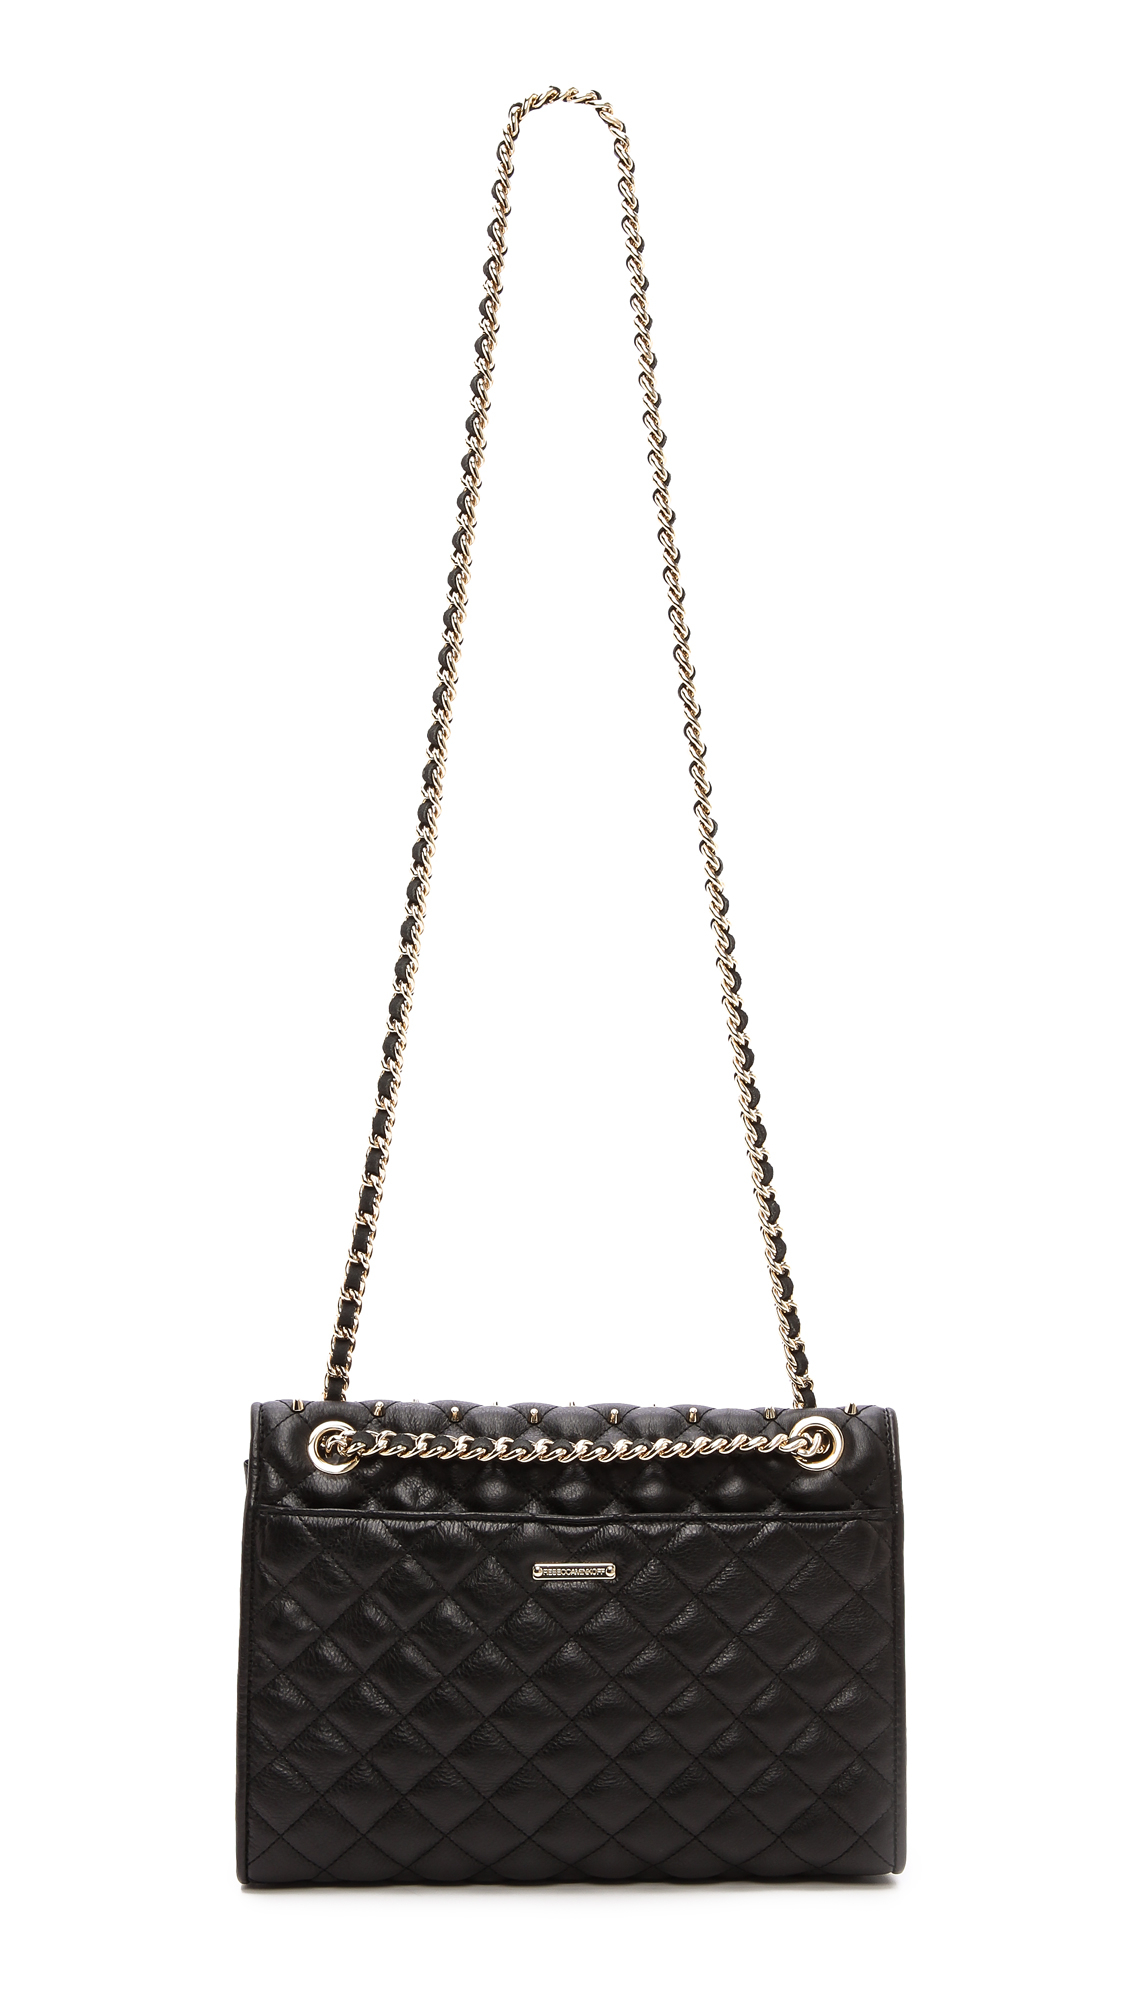 Lyst - Rebecca Minkoff Quilted Affair Bag with Studs in Black